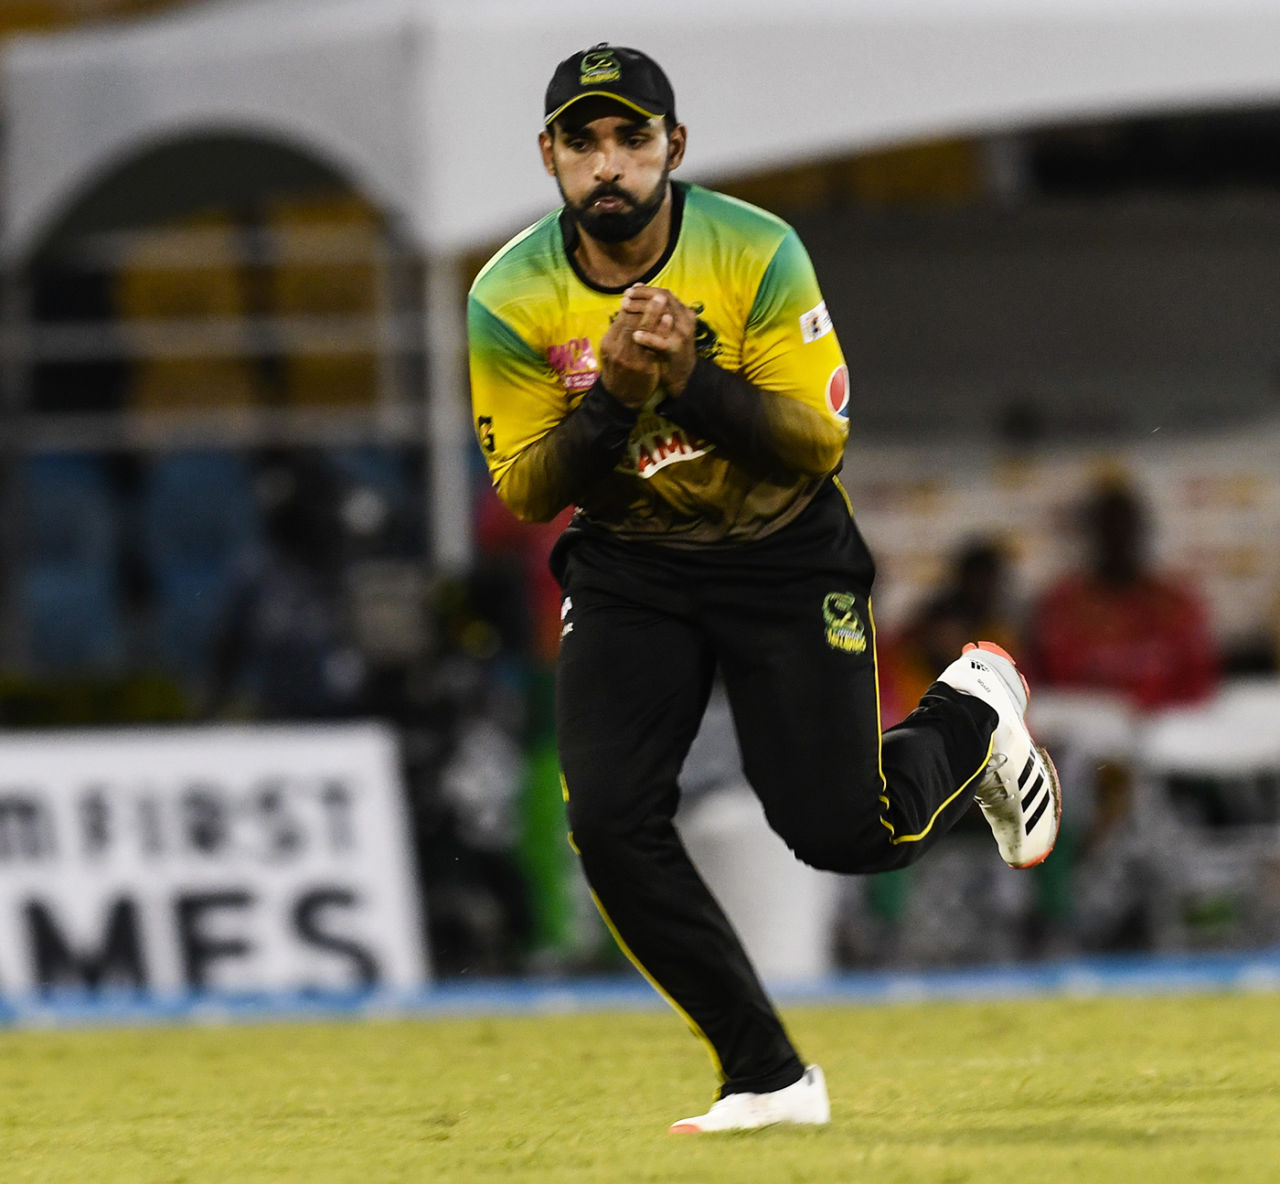 Asif Ali takes a catch to dismiss Sherfane Rutherford, Guyana Amazon Warriors v Jamaica Tallawahs, CPL 2020, Trinidad, August 25, 2020